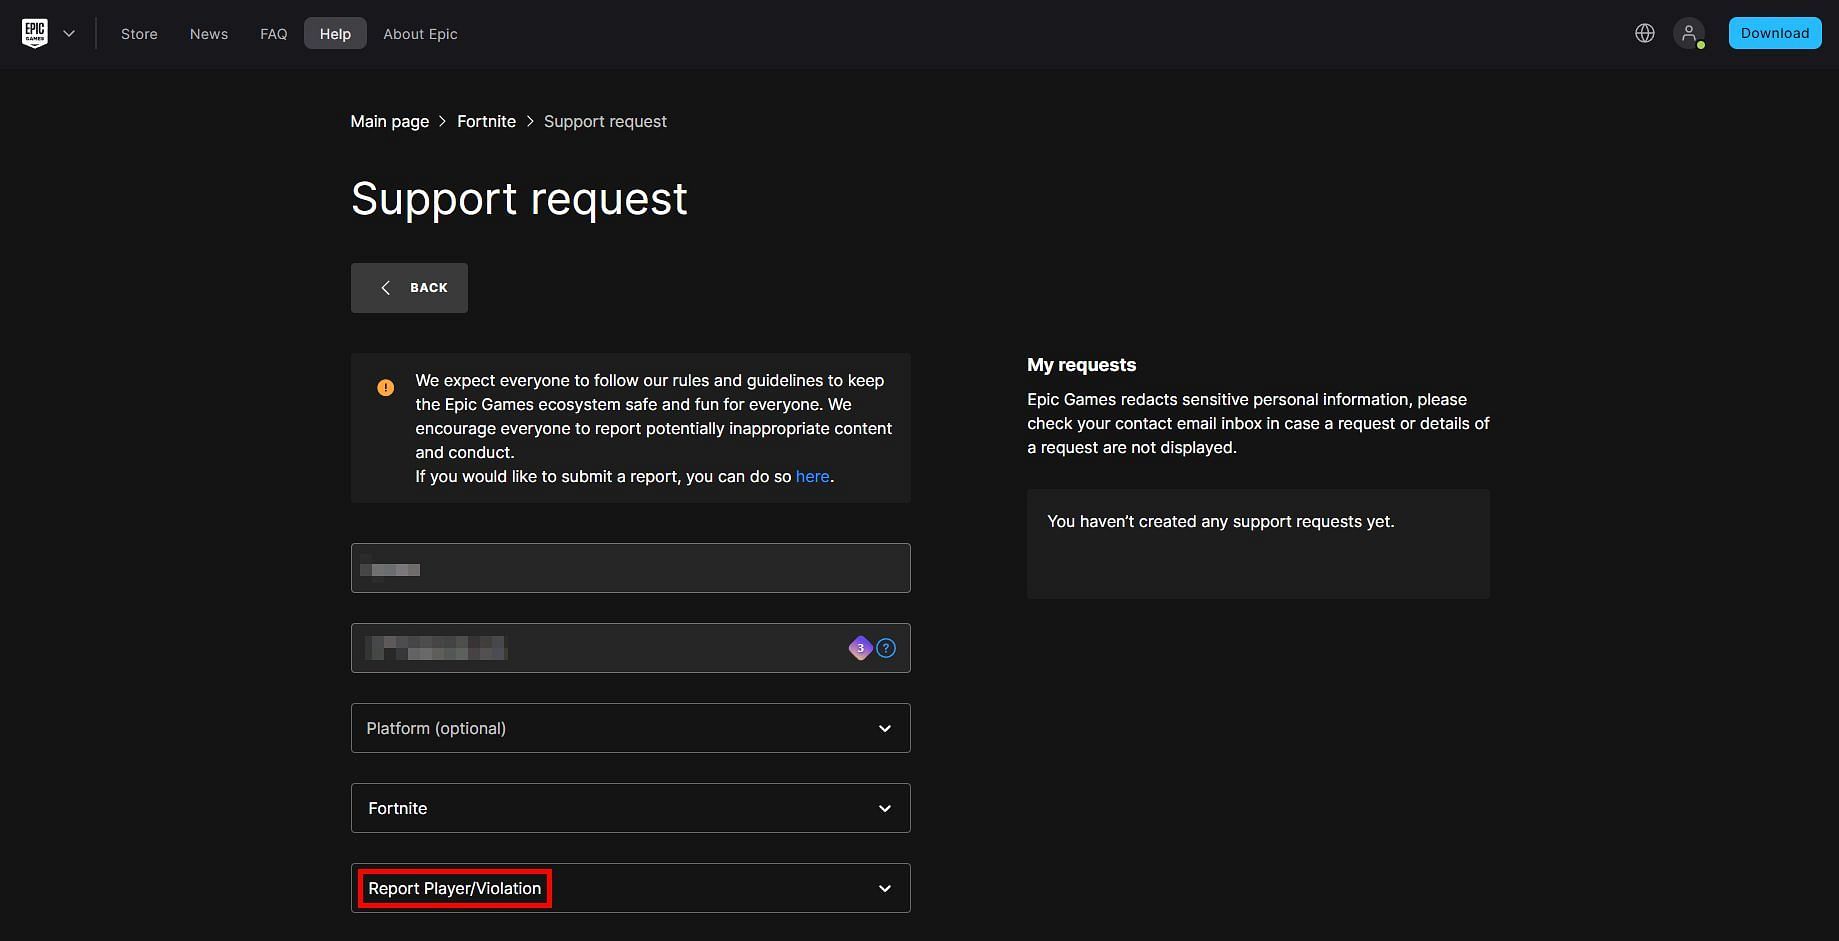 Epic Games contact form (Image via Epic Games)